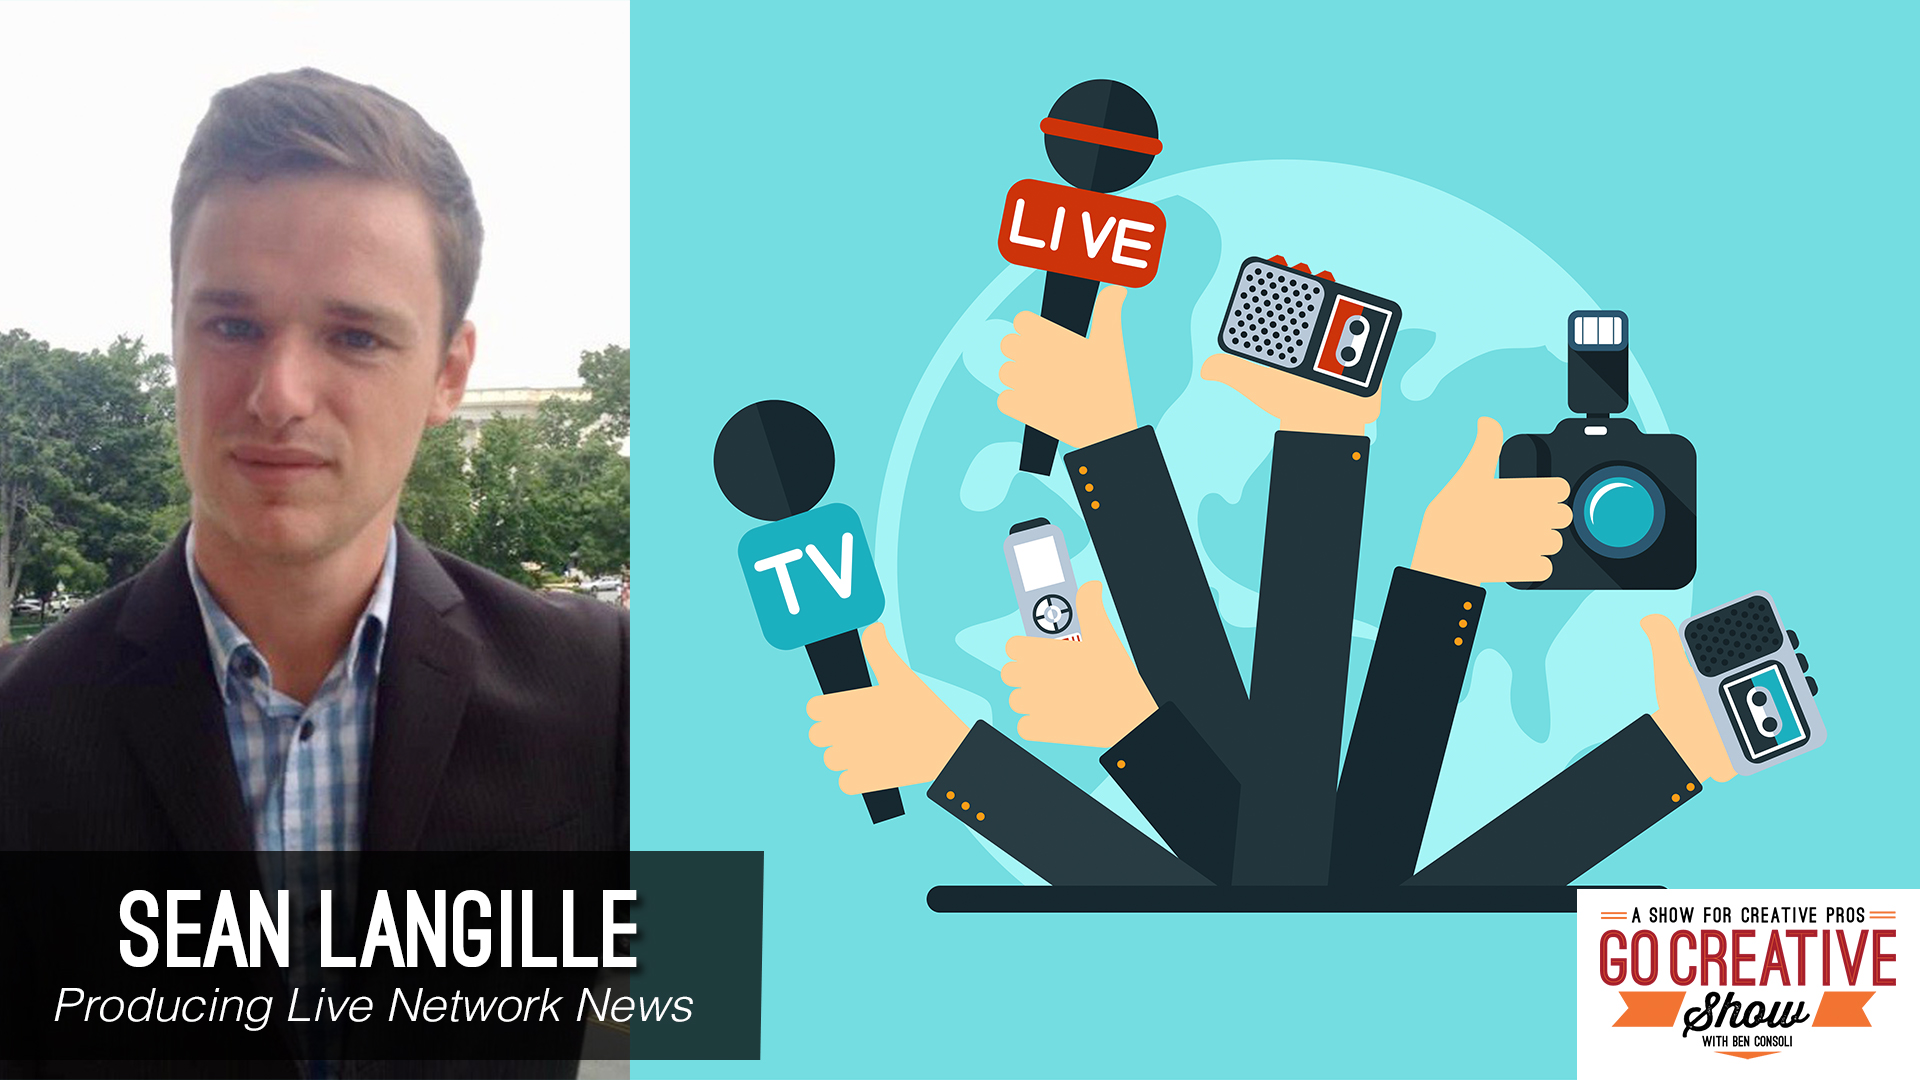 Sean Langille Fox News producers on Go Creative Show with Ben Consoli